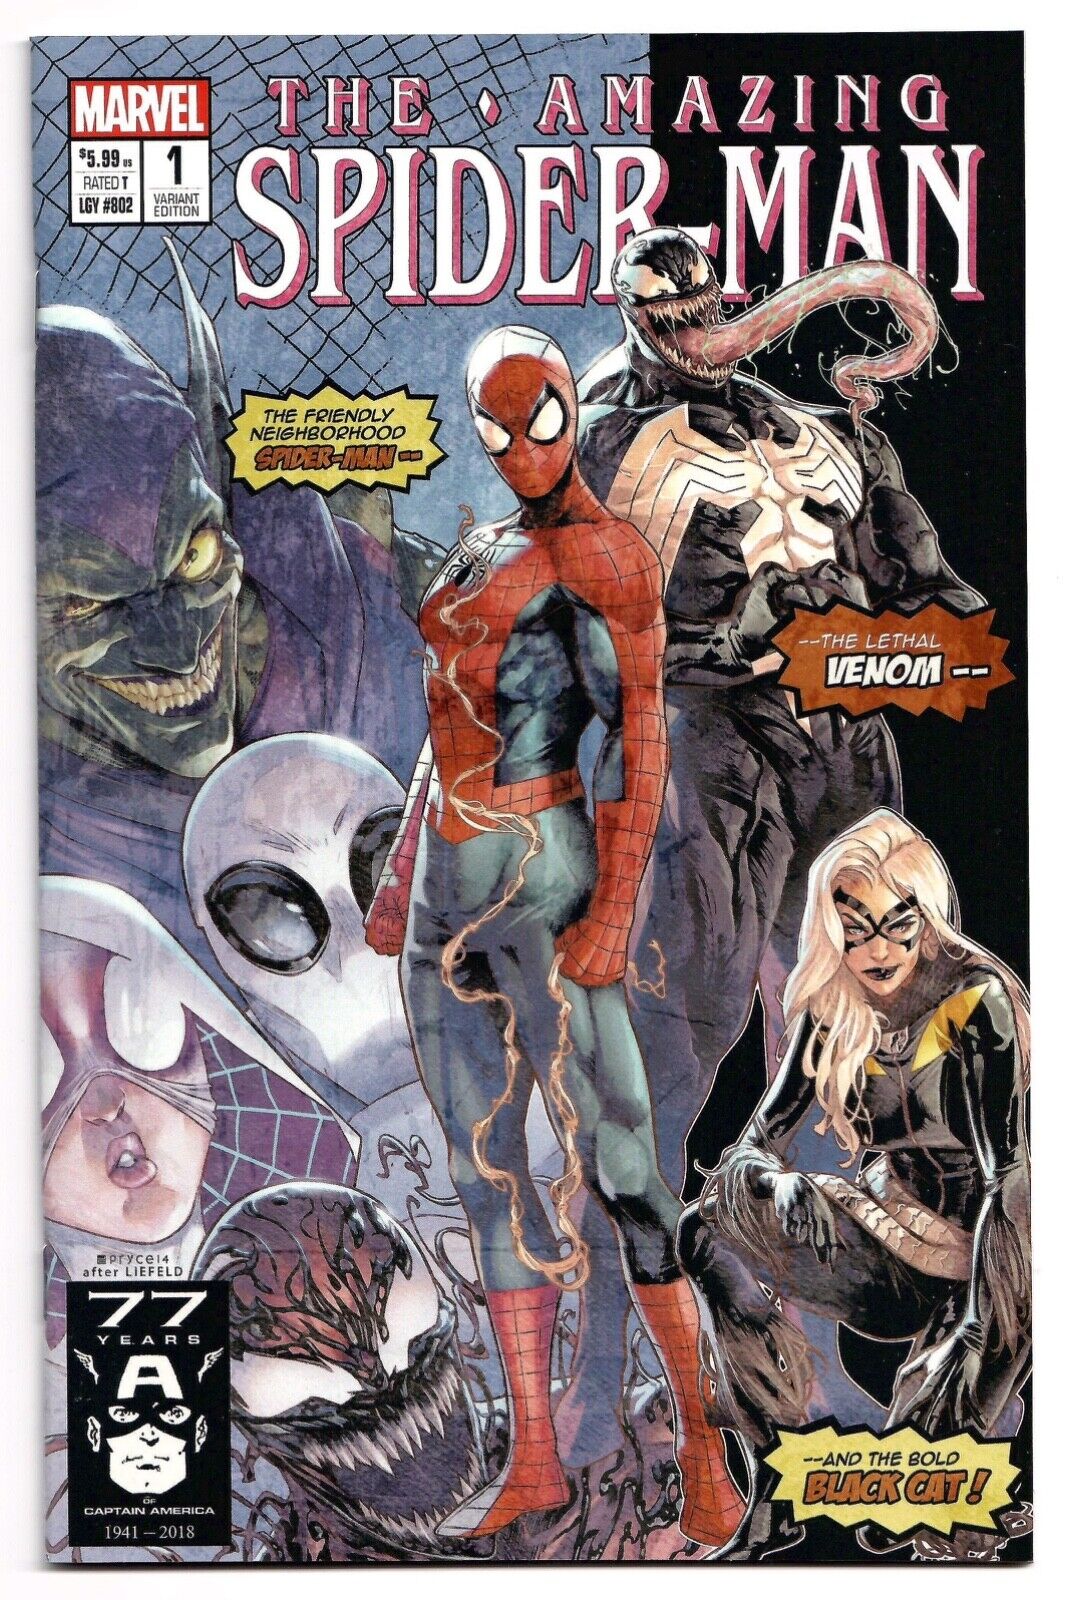 Amazing Spider-Man #1 Jamal Campbell COVER B Variant ASM New Mutants 98 HOMAGE